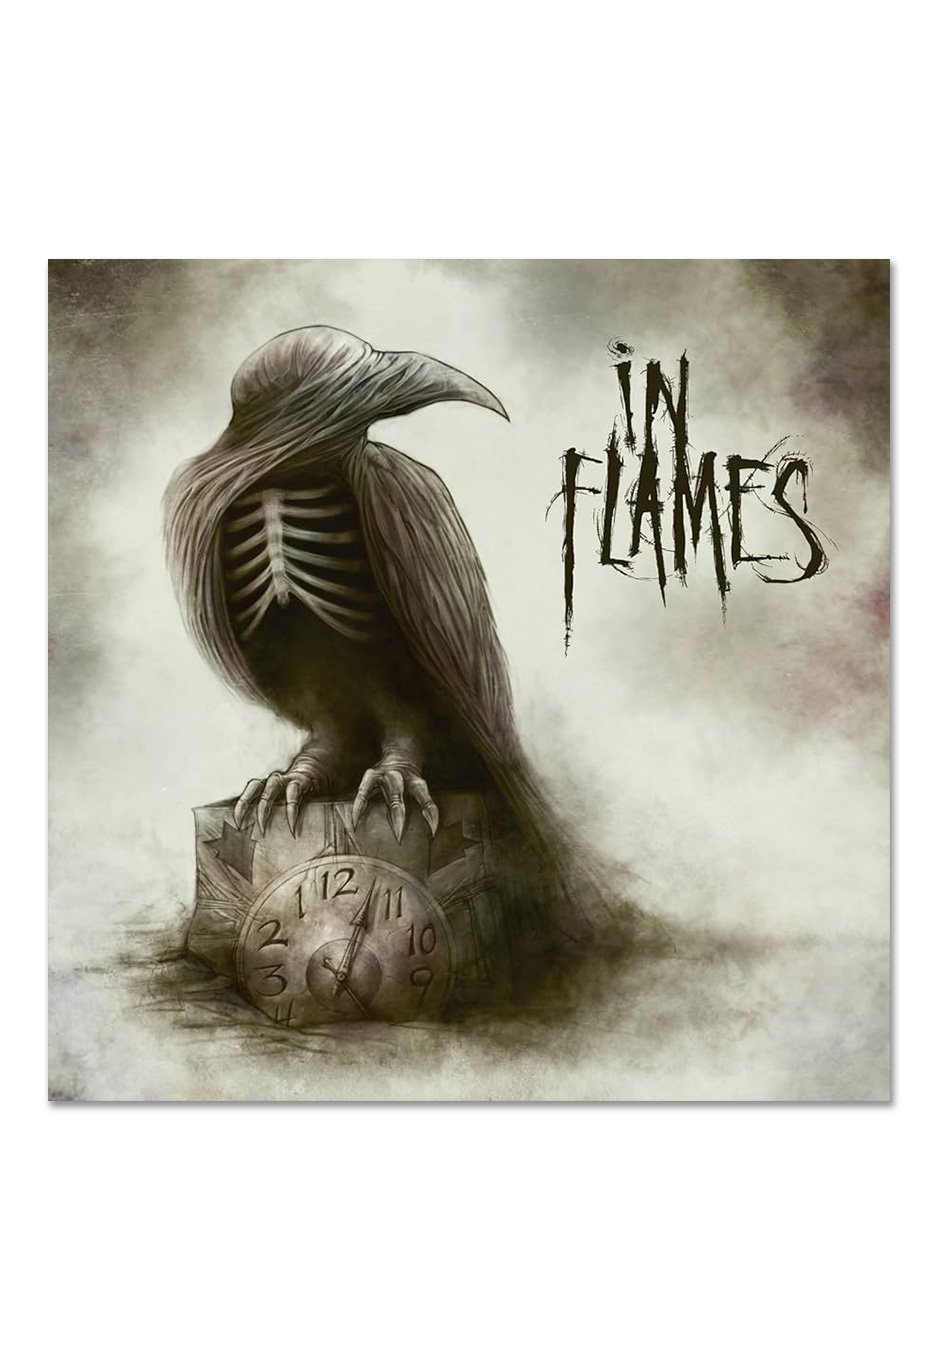 In Flames - Sounds Of A Playground Fading Ltd. Natural - Colored 2 Vinyl